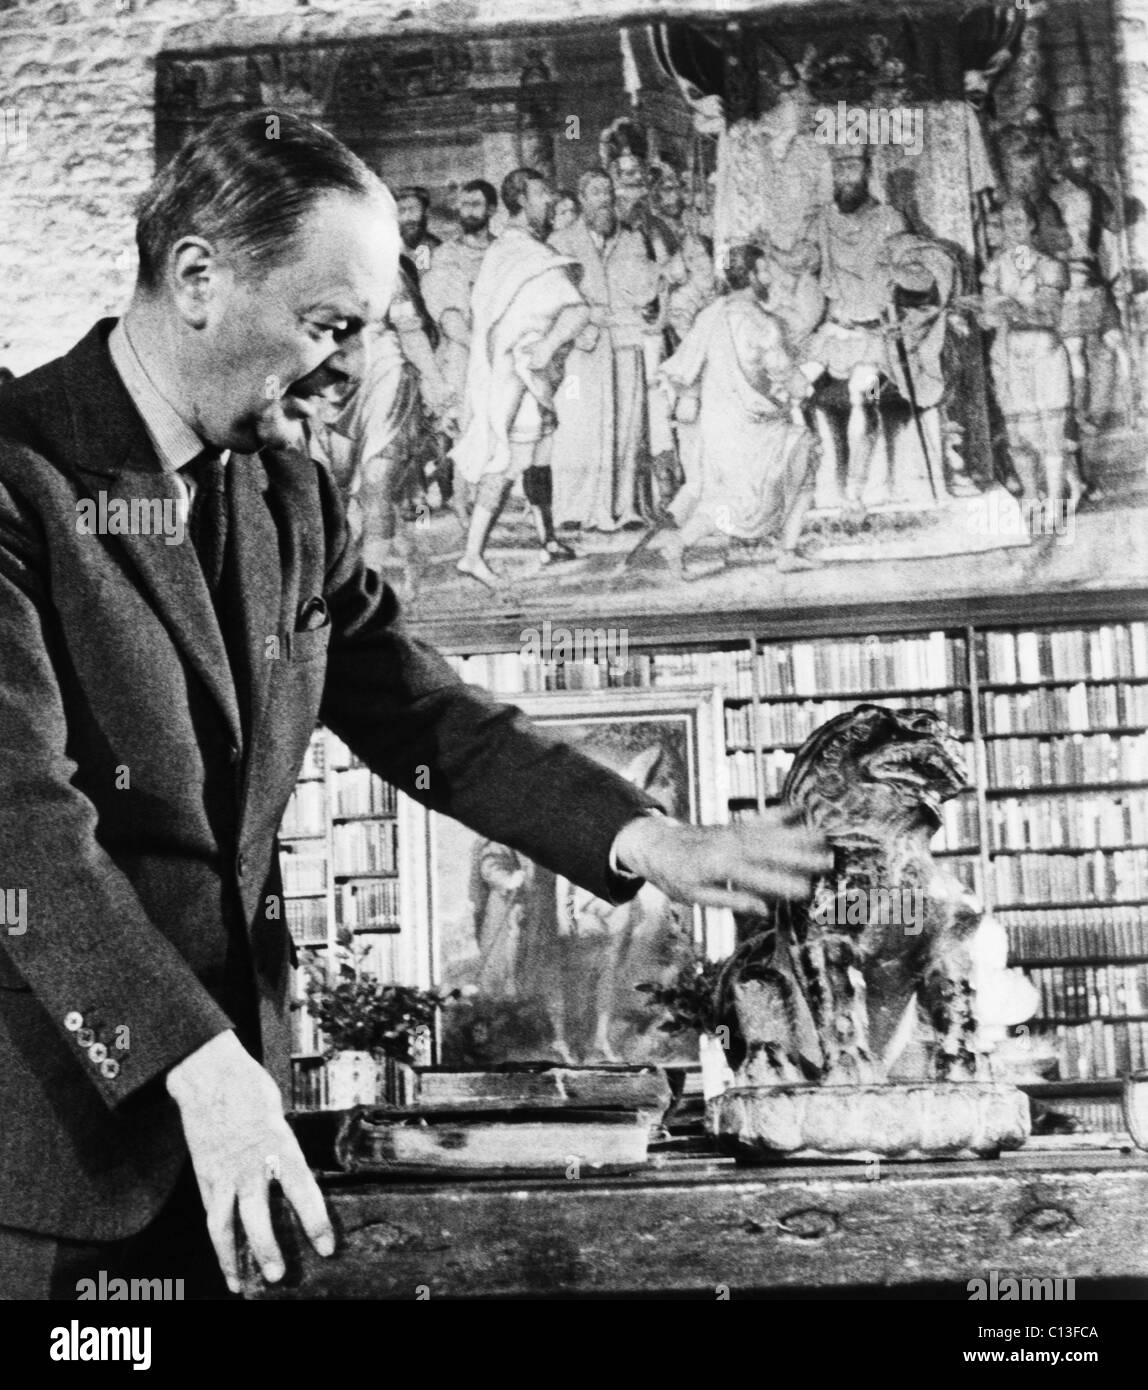 Kenneth Clark (1903-1983), English author and art historian, presenting CIVILISATION, here he is examining a Ming Lion in the library of his home, Saltwood Castle in Kent, England, circa 1970. Stock Photo